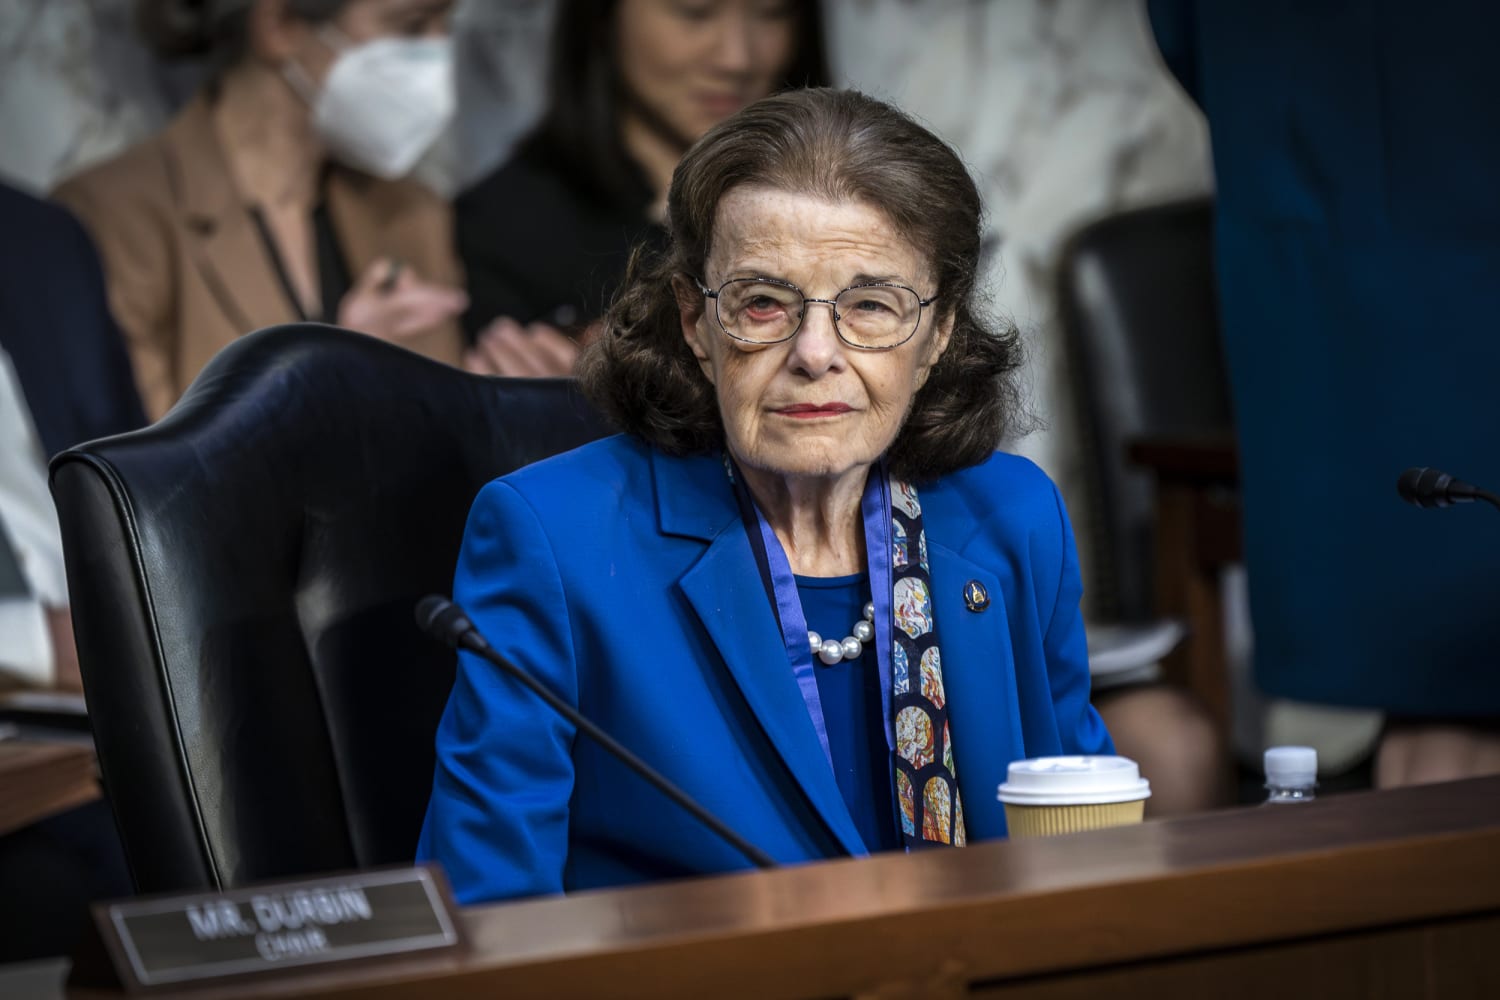 The ugly proxy war over Dianne Feinstein's Senate seat